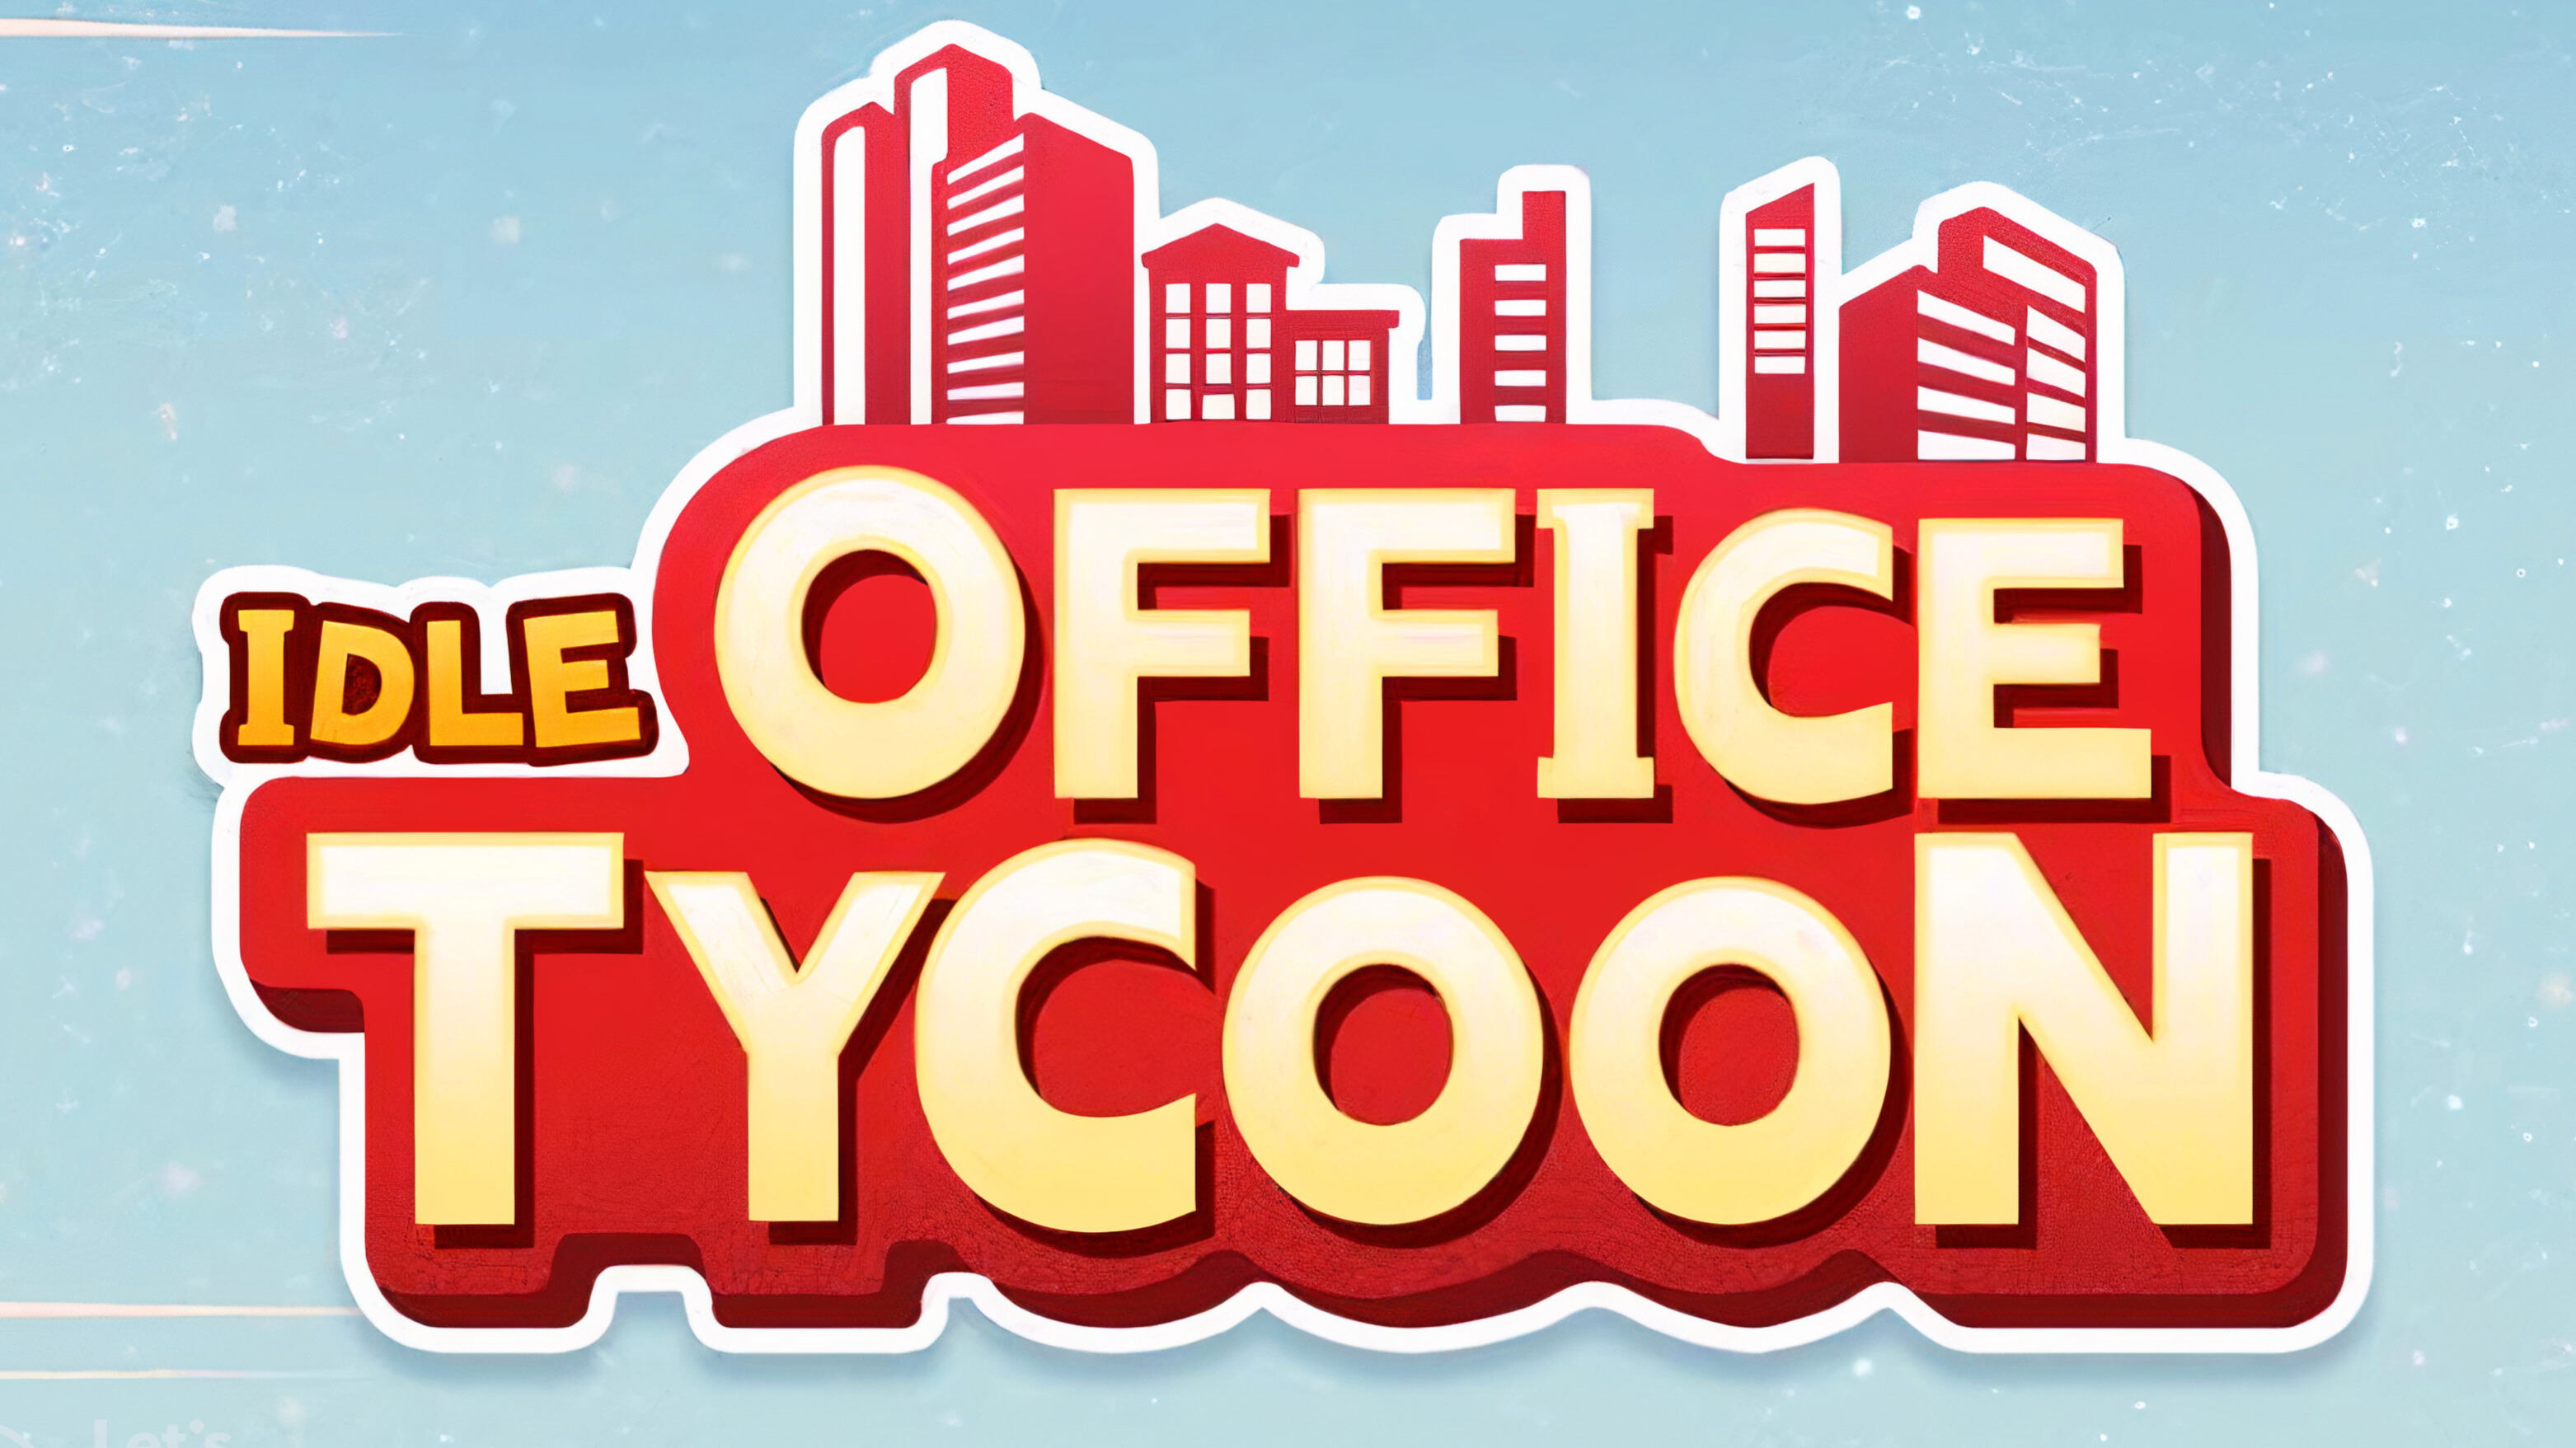 Idle Office Tycoon. Idle Office Tycoon подарочный код. Idle Office Tycoon коды.